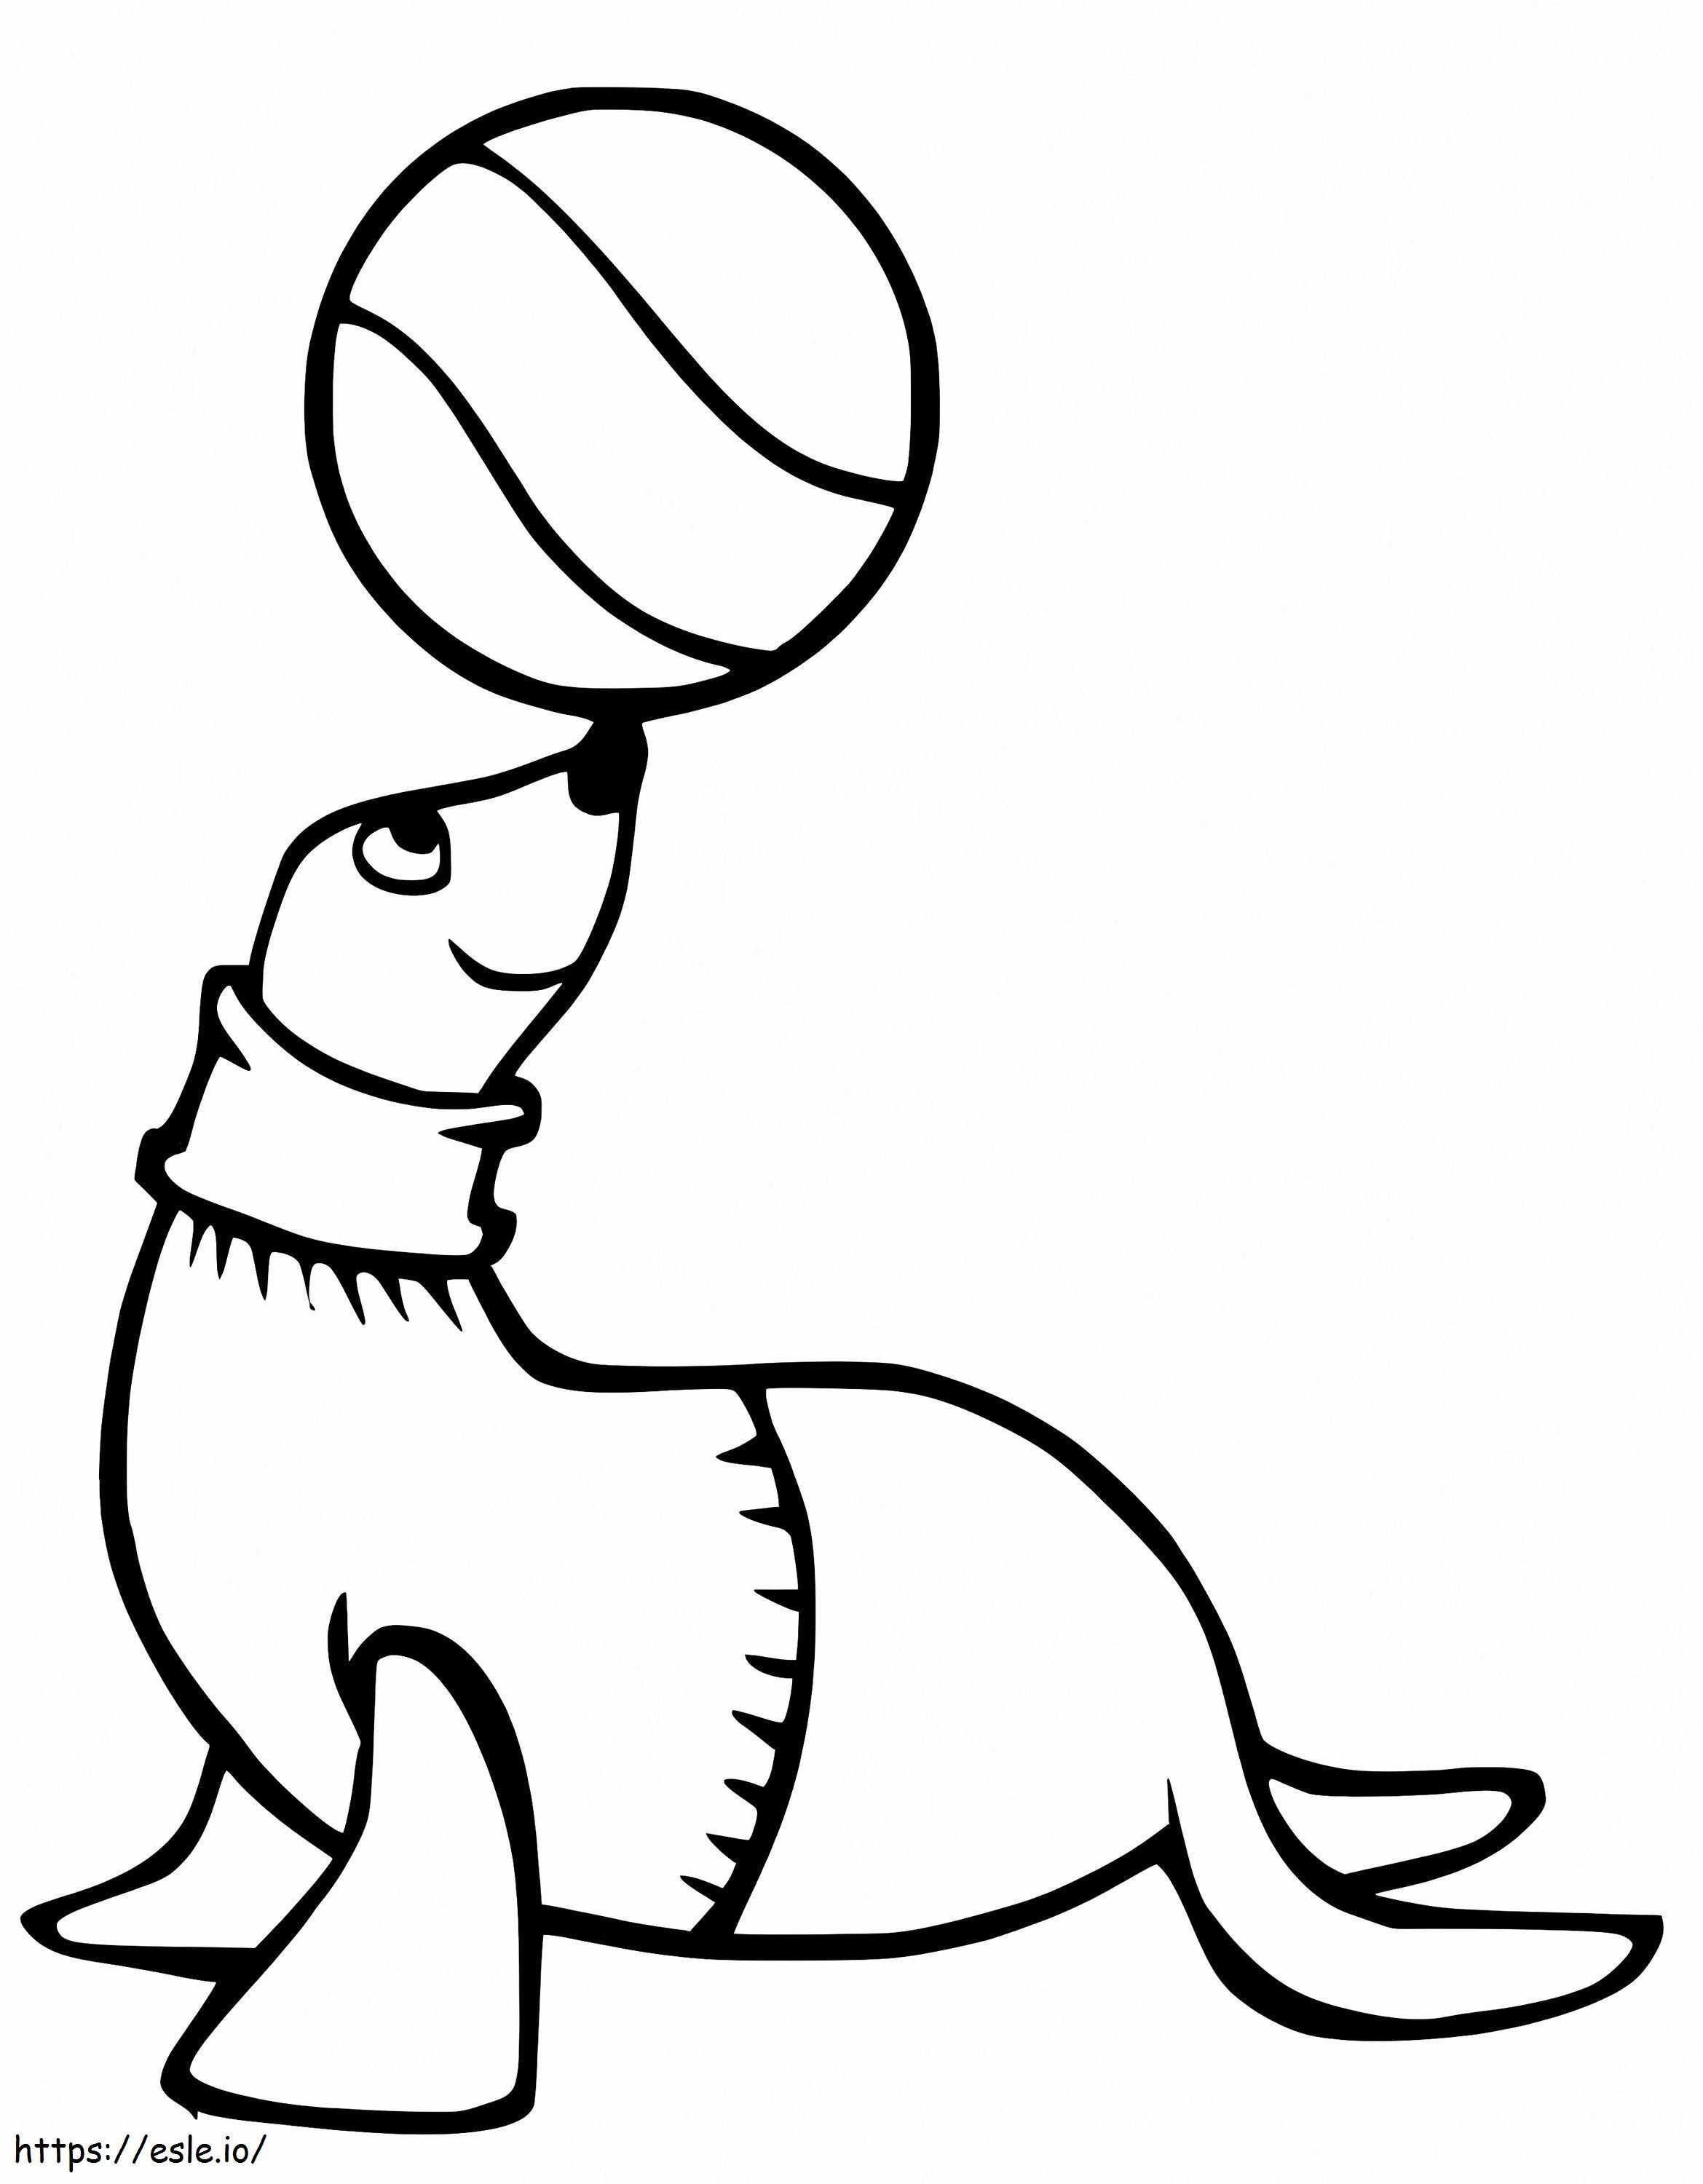 Sea Lion Playing Ball coloring page